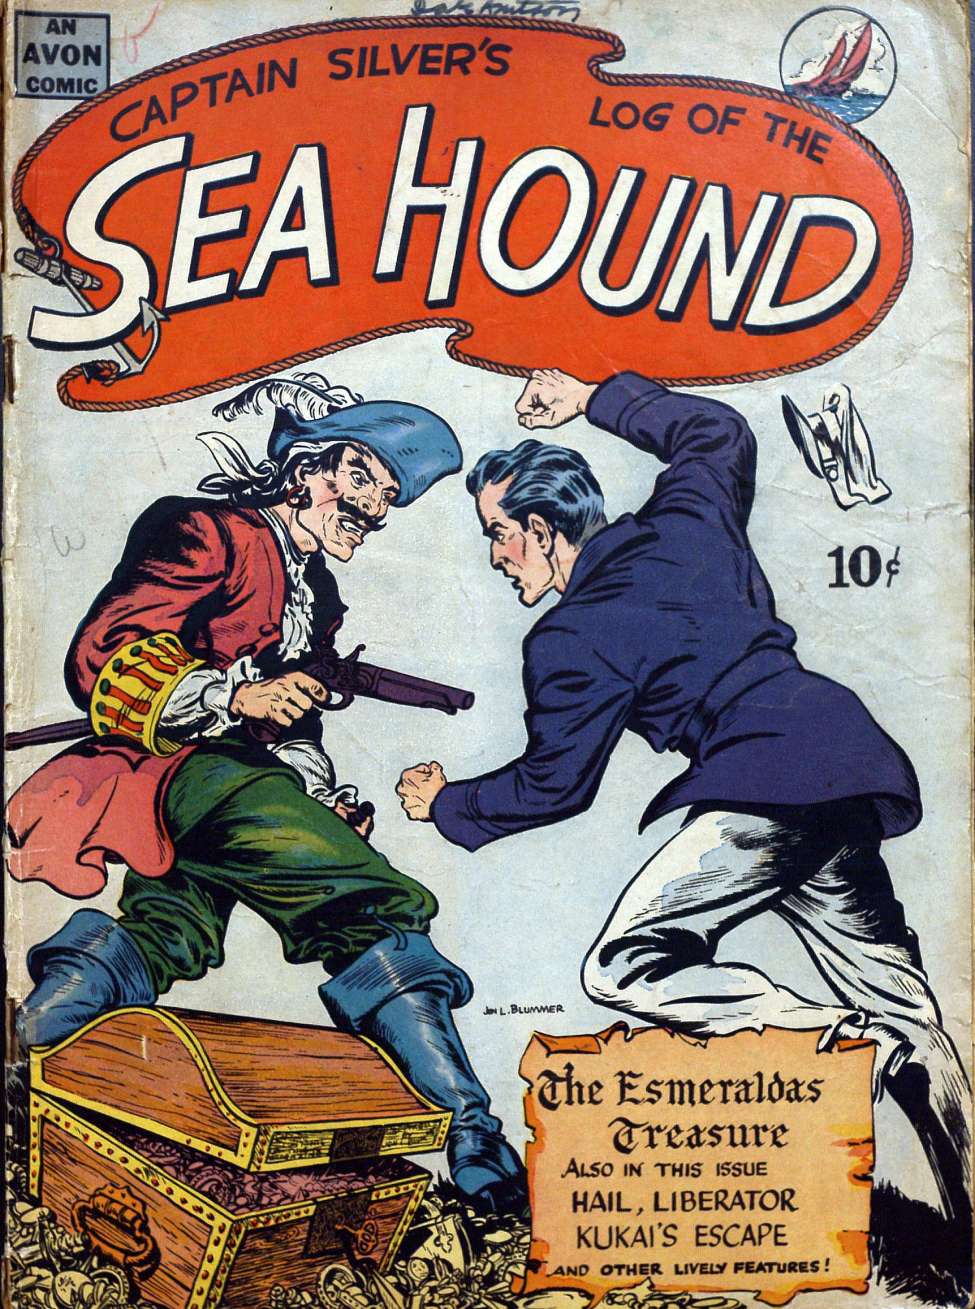 Book Cover For Captain Silver's Log of the Sea Hound (nn) - Version 2